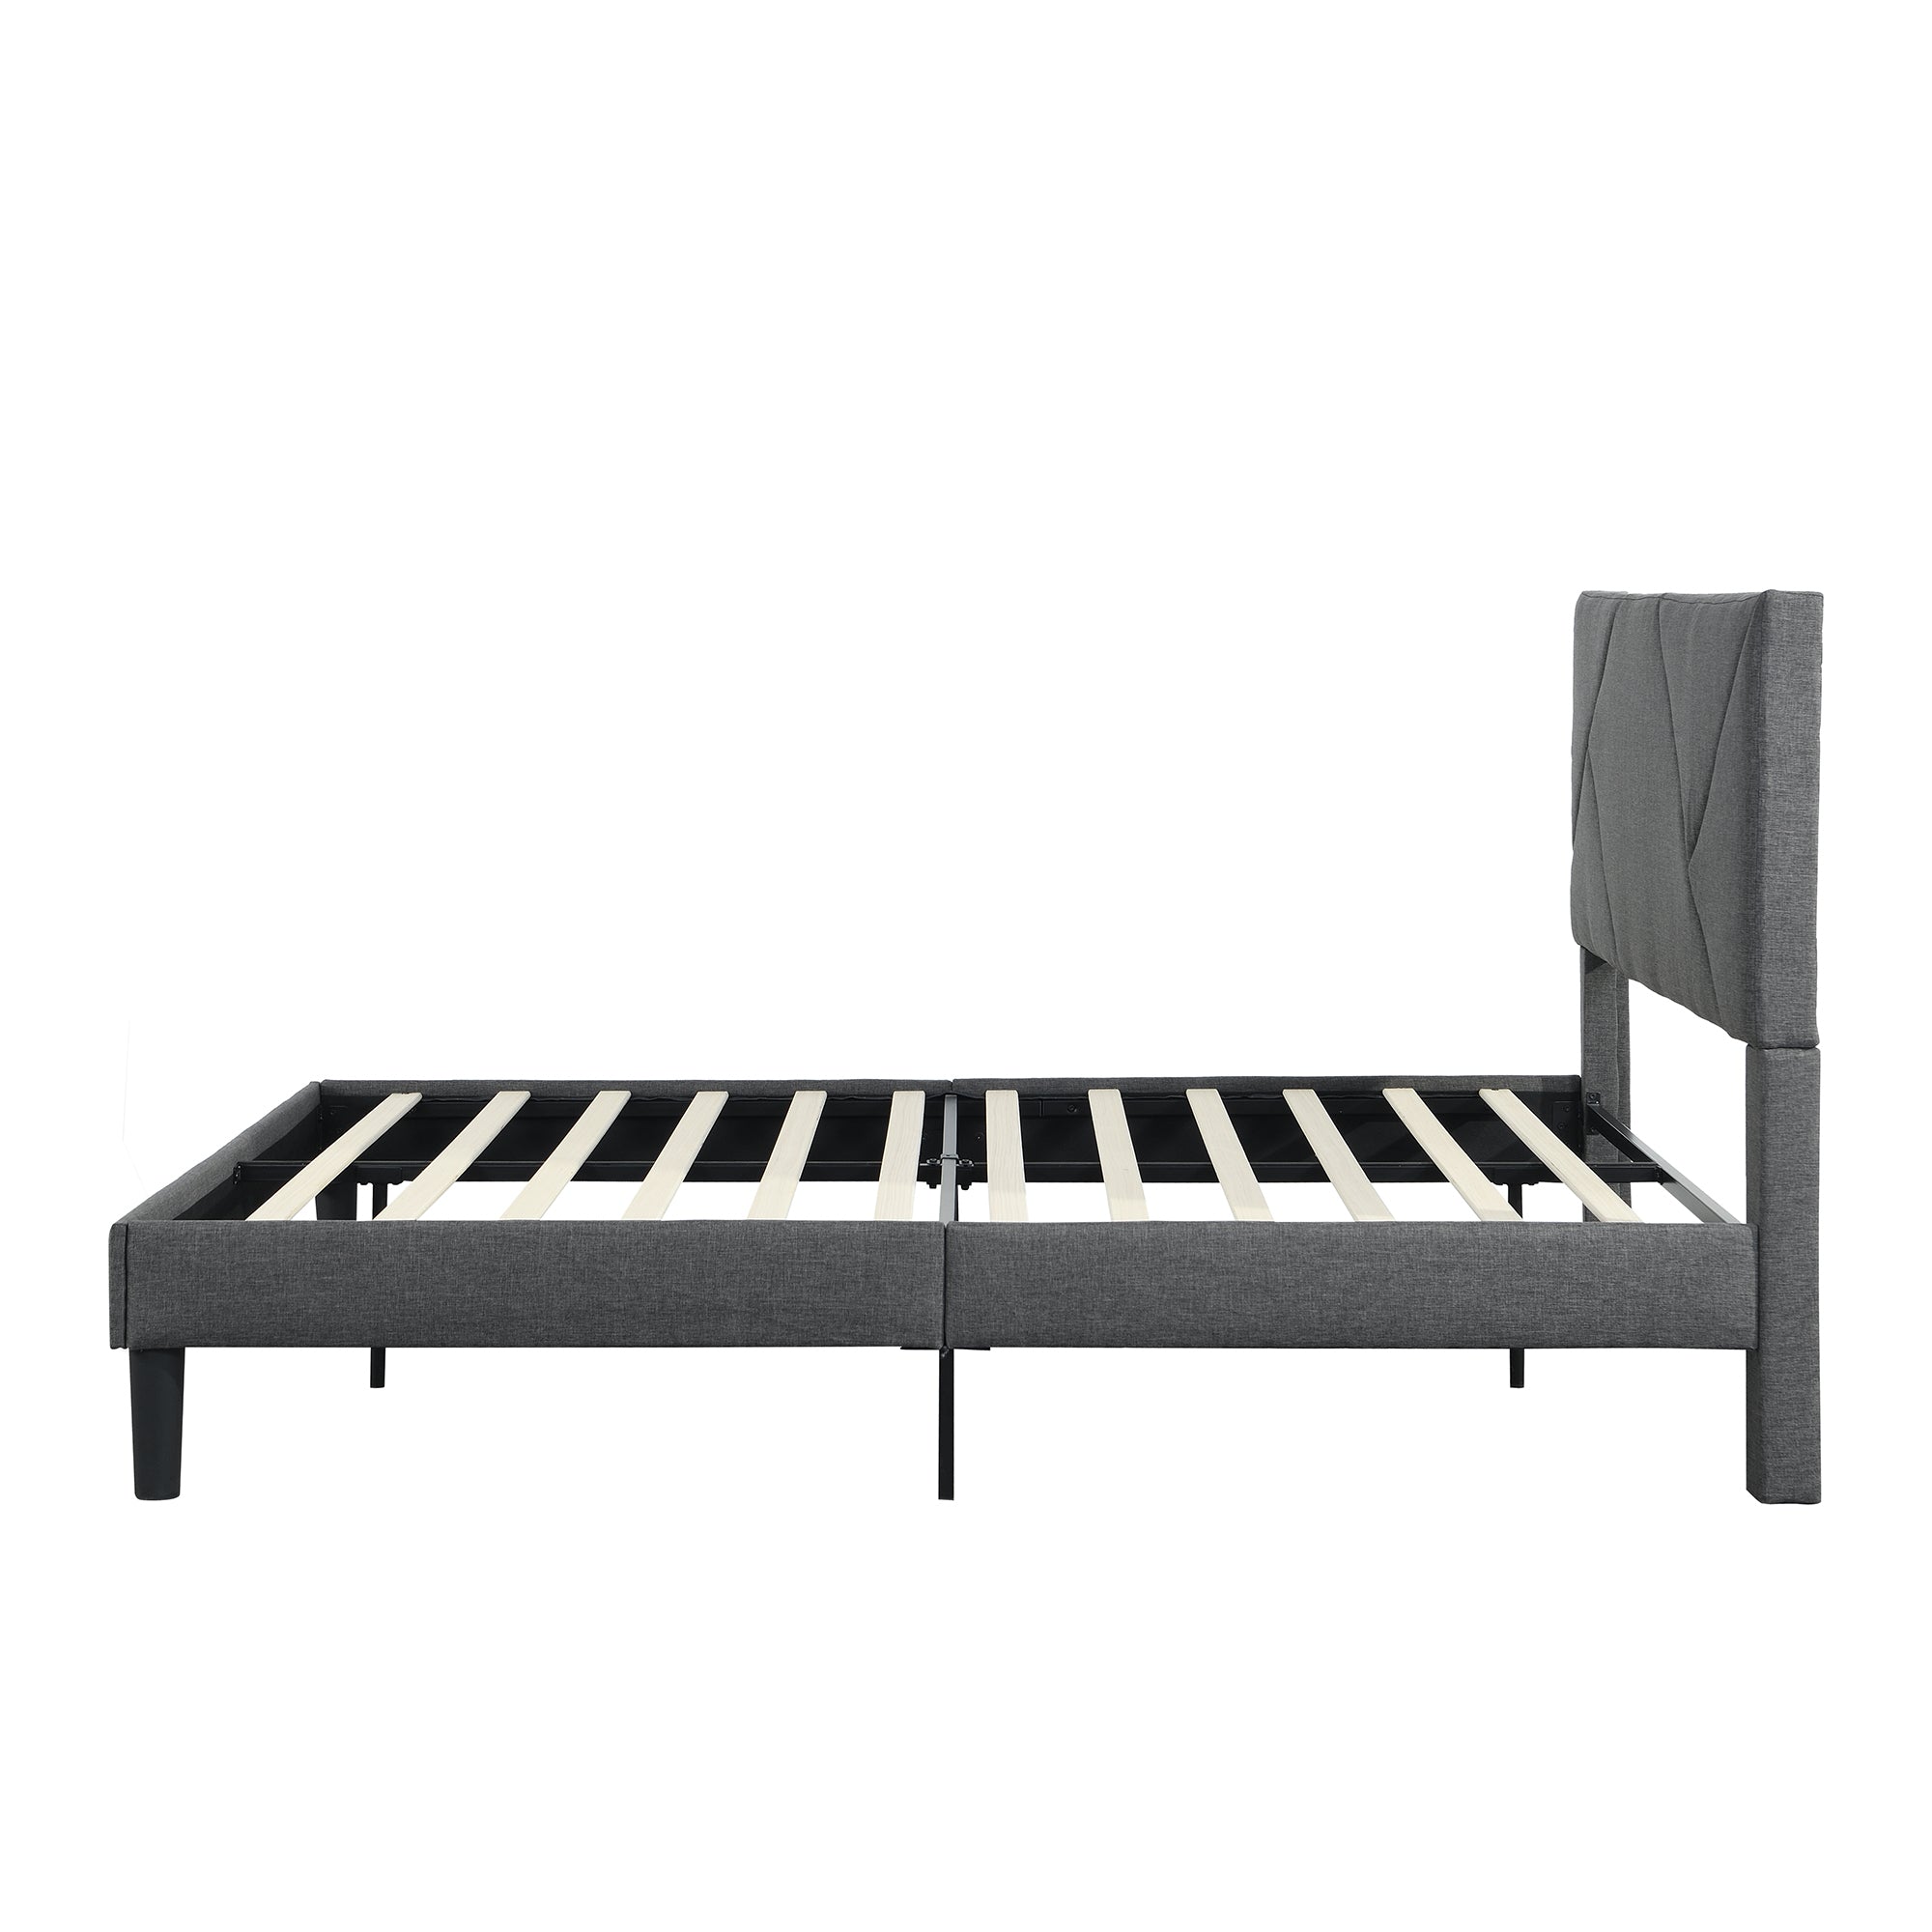 Queen Size Upholstered Platform Bed Frame with gray-fabric